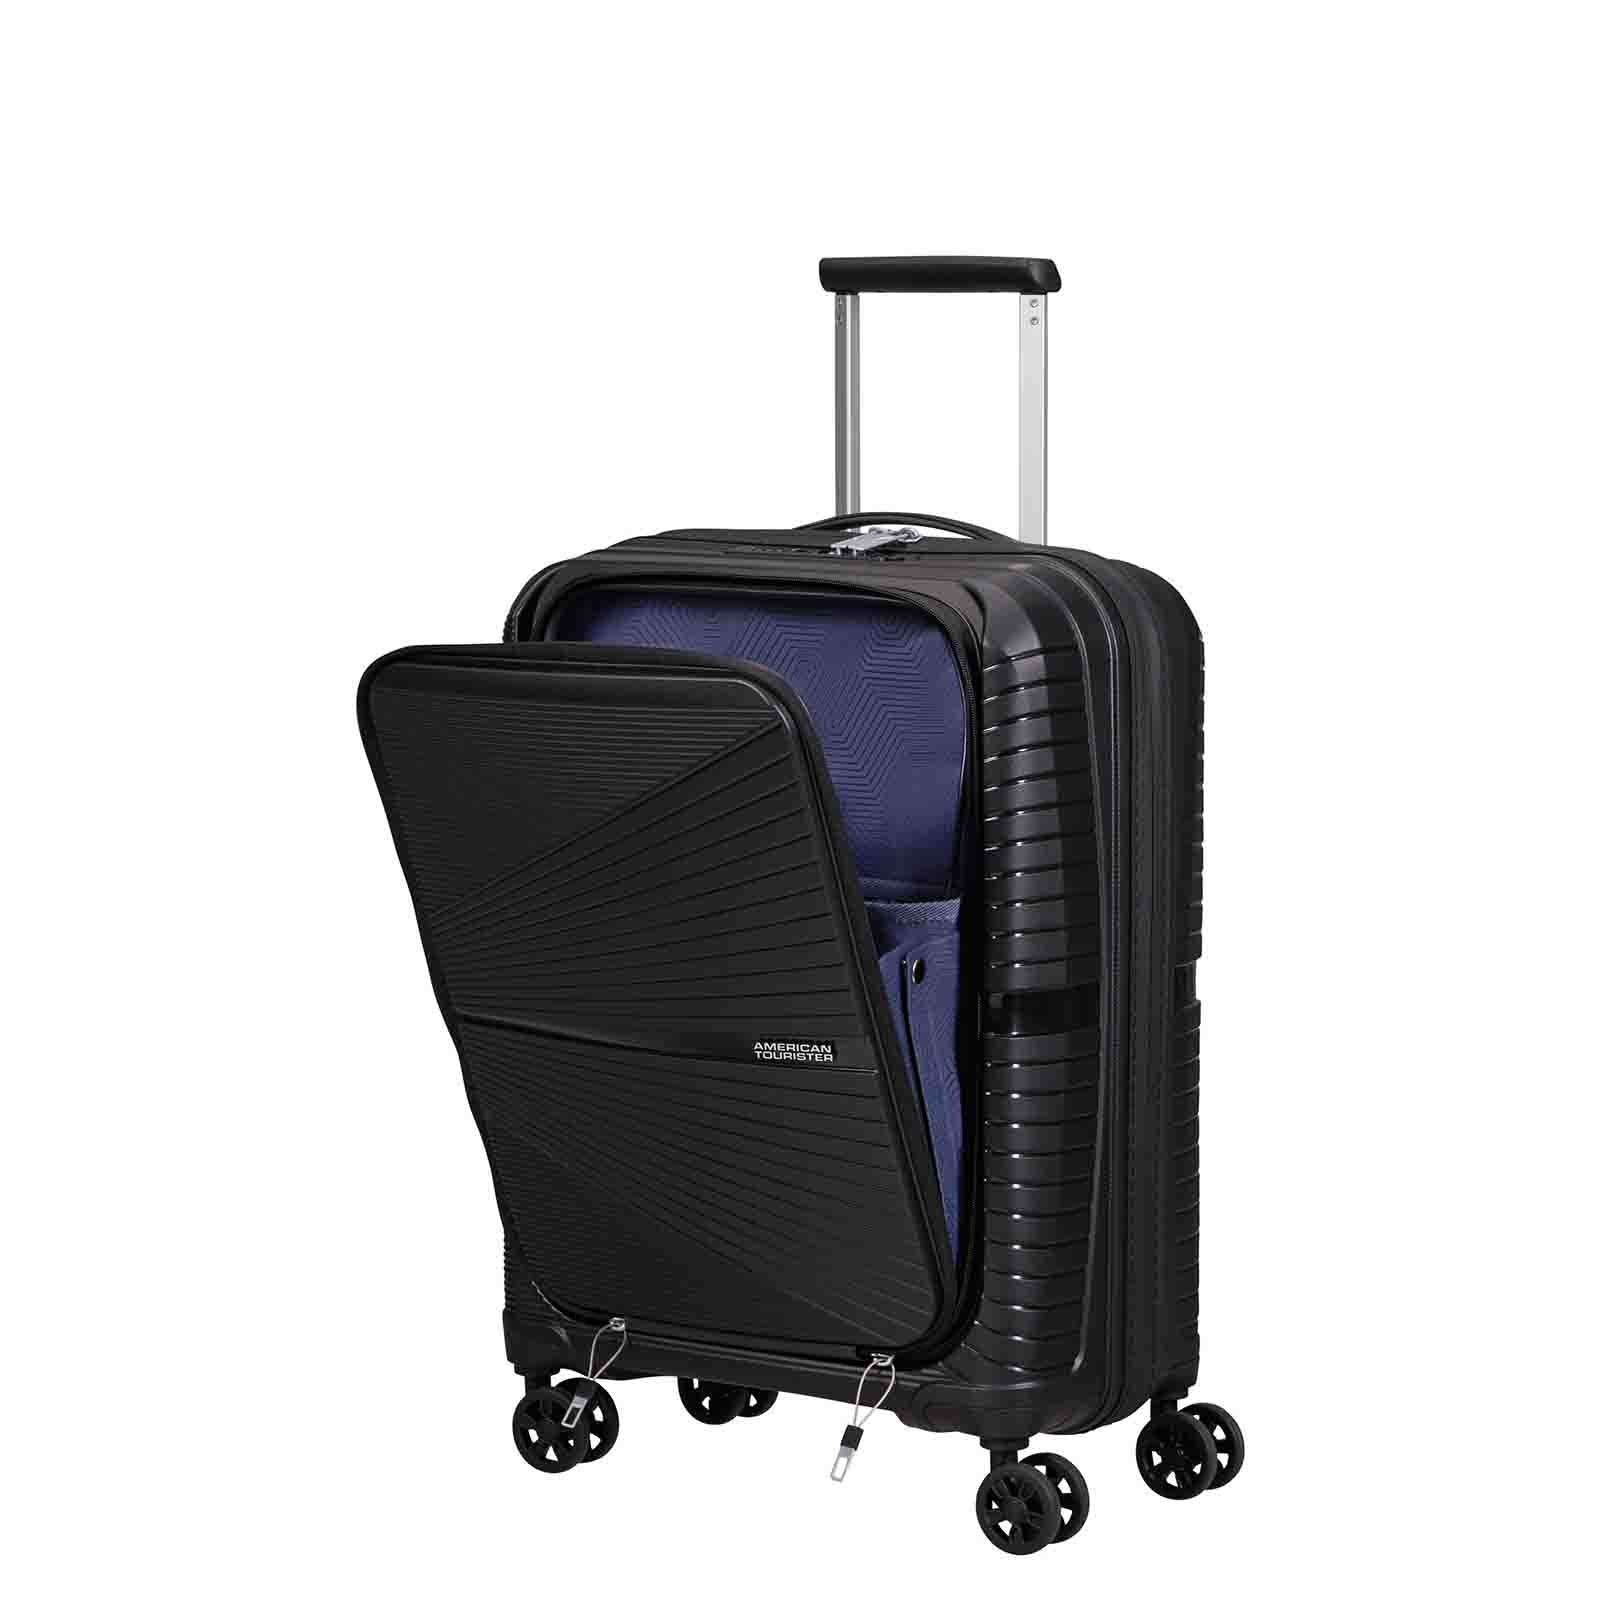 American-Tourister-Airconic-55cm-Suitcase-Front-Opening-Onyx-Black-Lid-Open